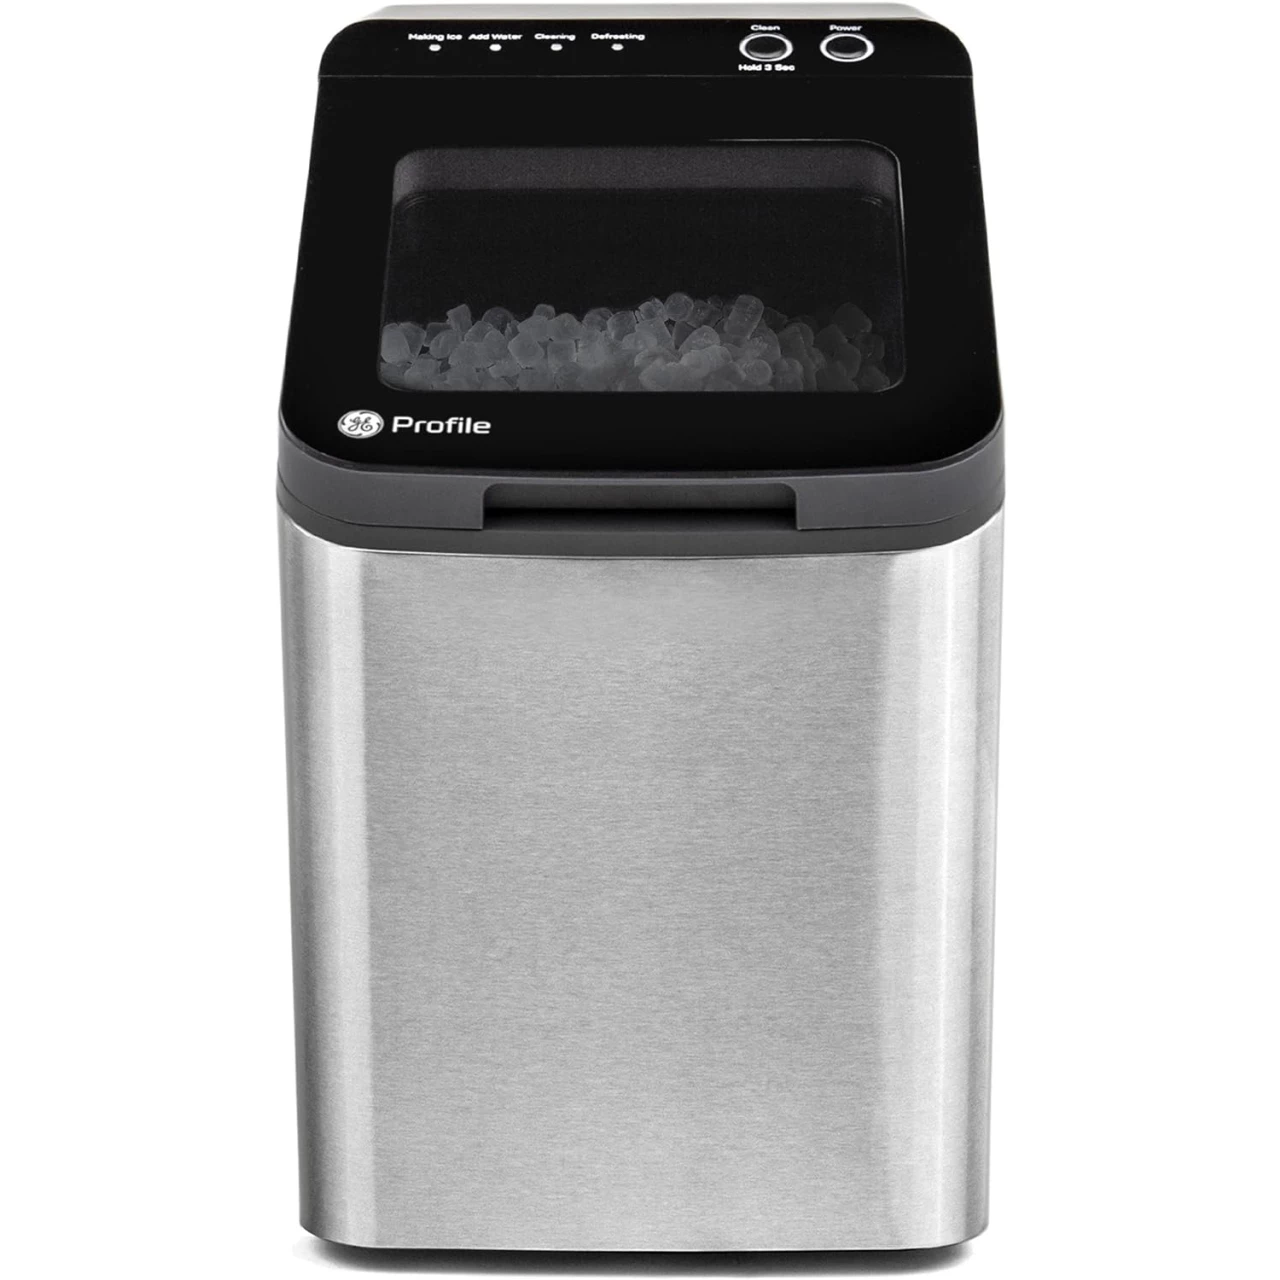 GE Profile Opal 1.0 Nugget Ice Maker| Countertop Pebble Ice Maker | Portable Ice Machine Makes up to 34 lbs. of Ice Per Day | Stainless Steel Finish